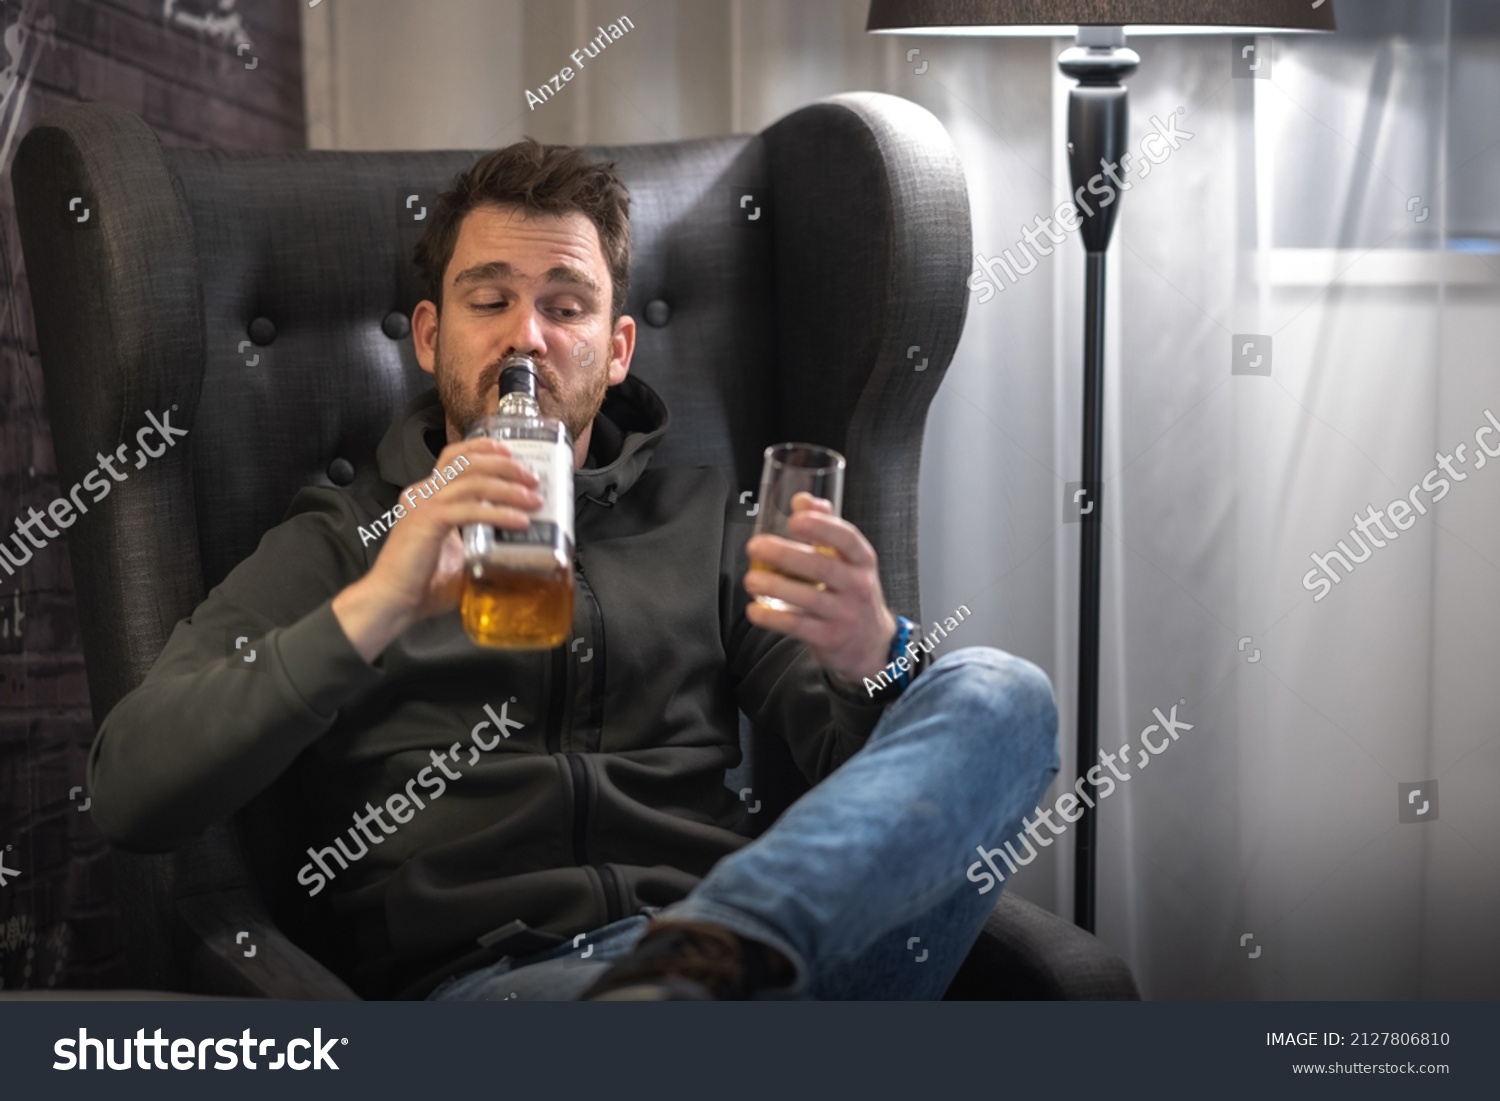 16 Whiskey jack room Images, Stock Photos & Vectors | Shutterstock